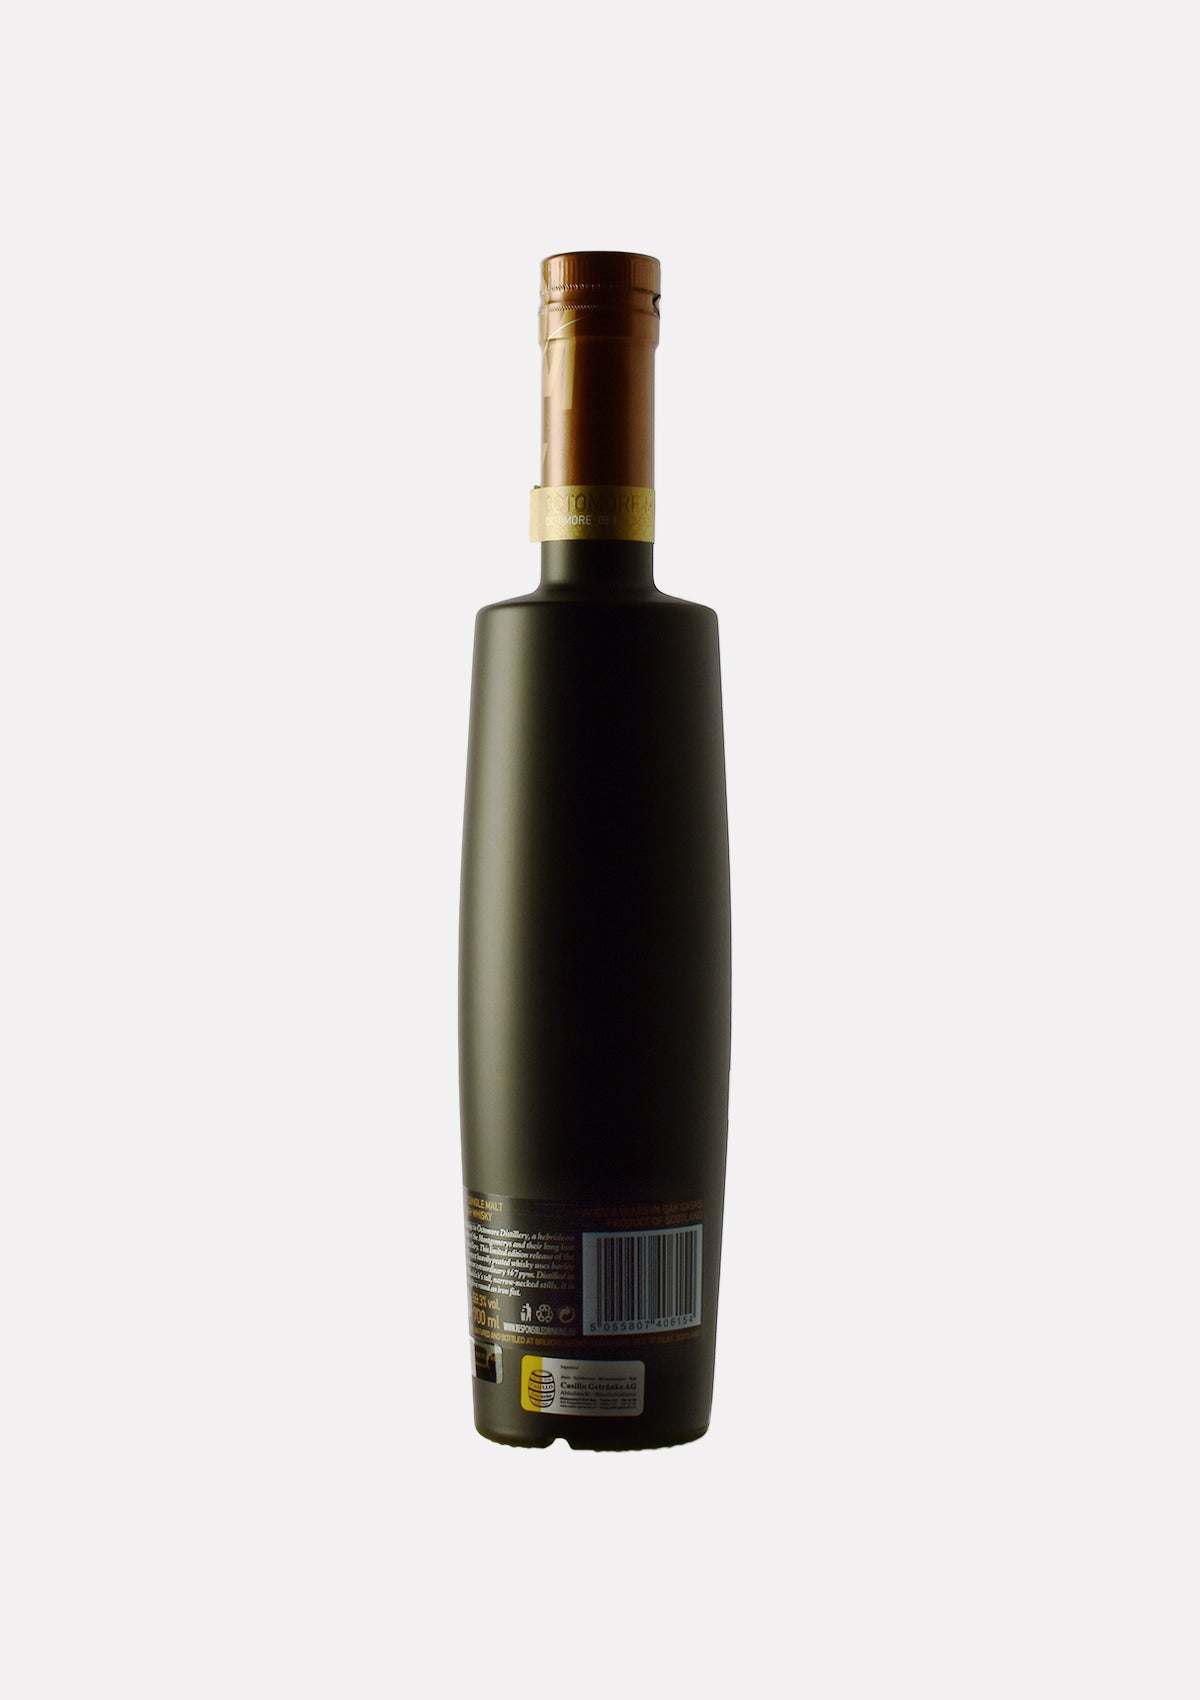 Octomore 08.1 167 ppm